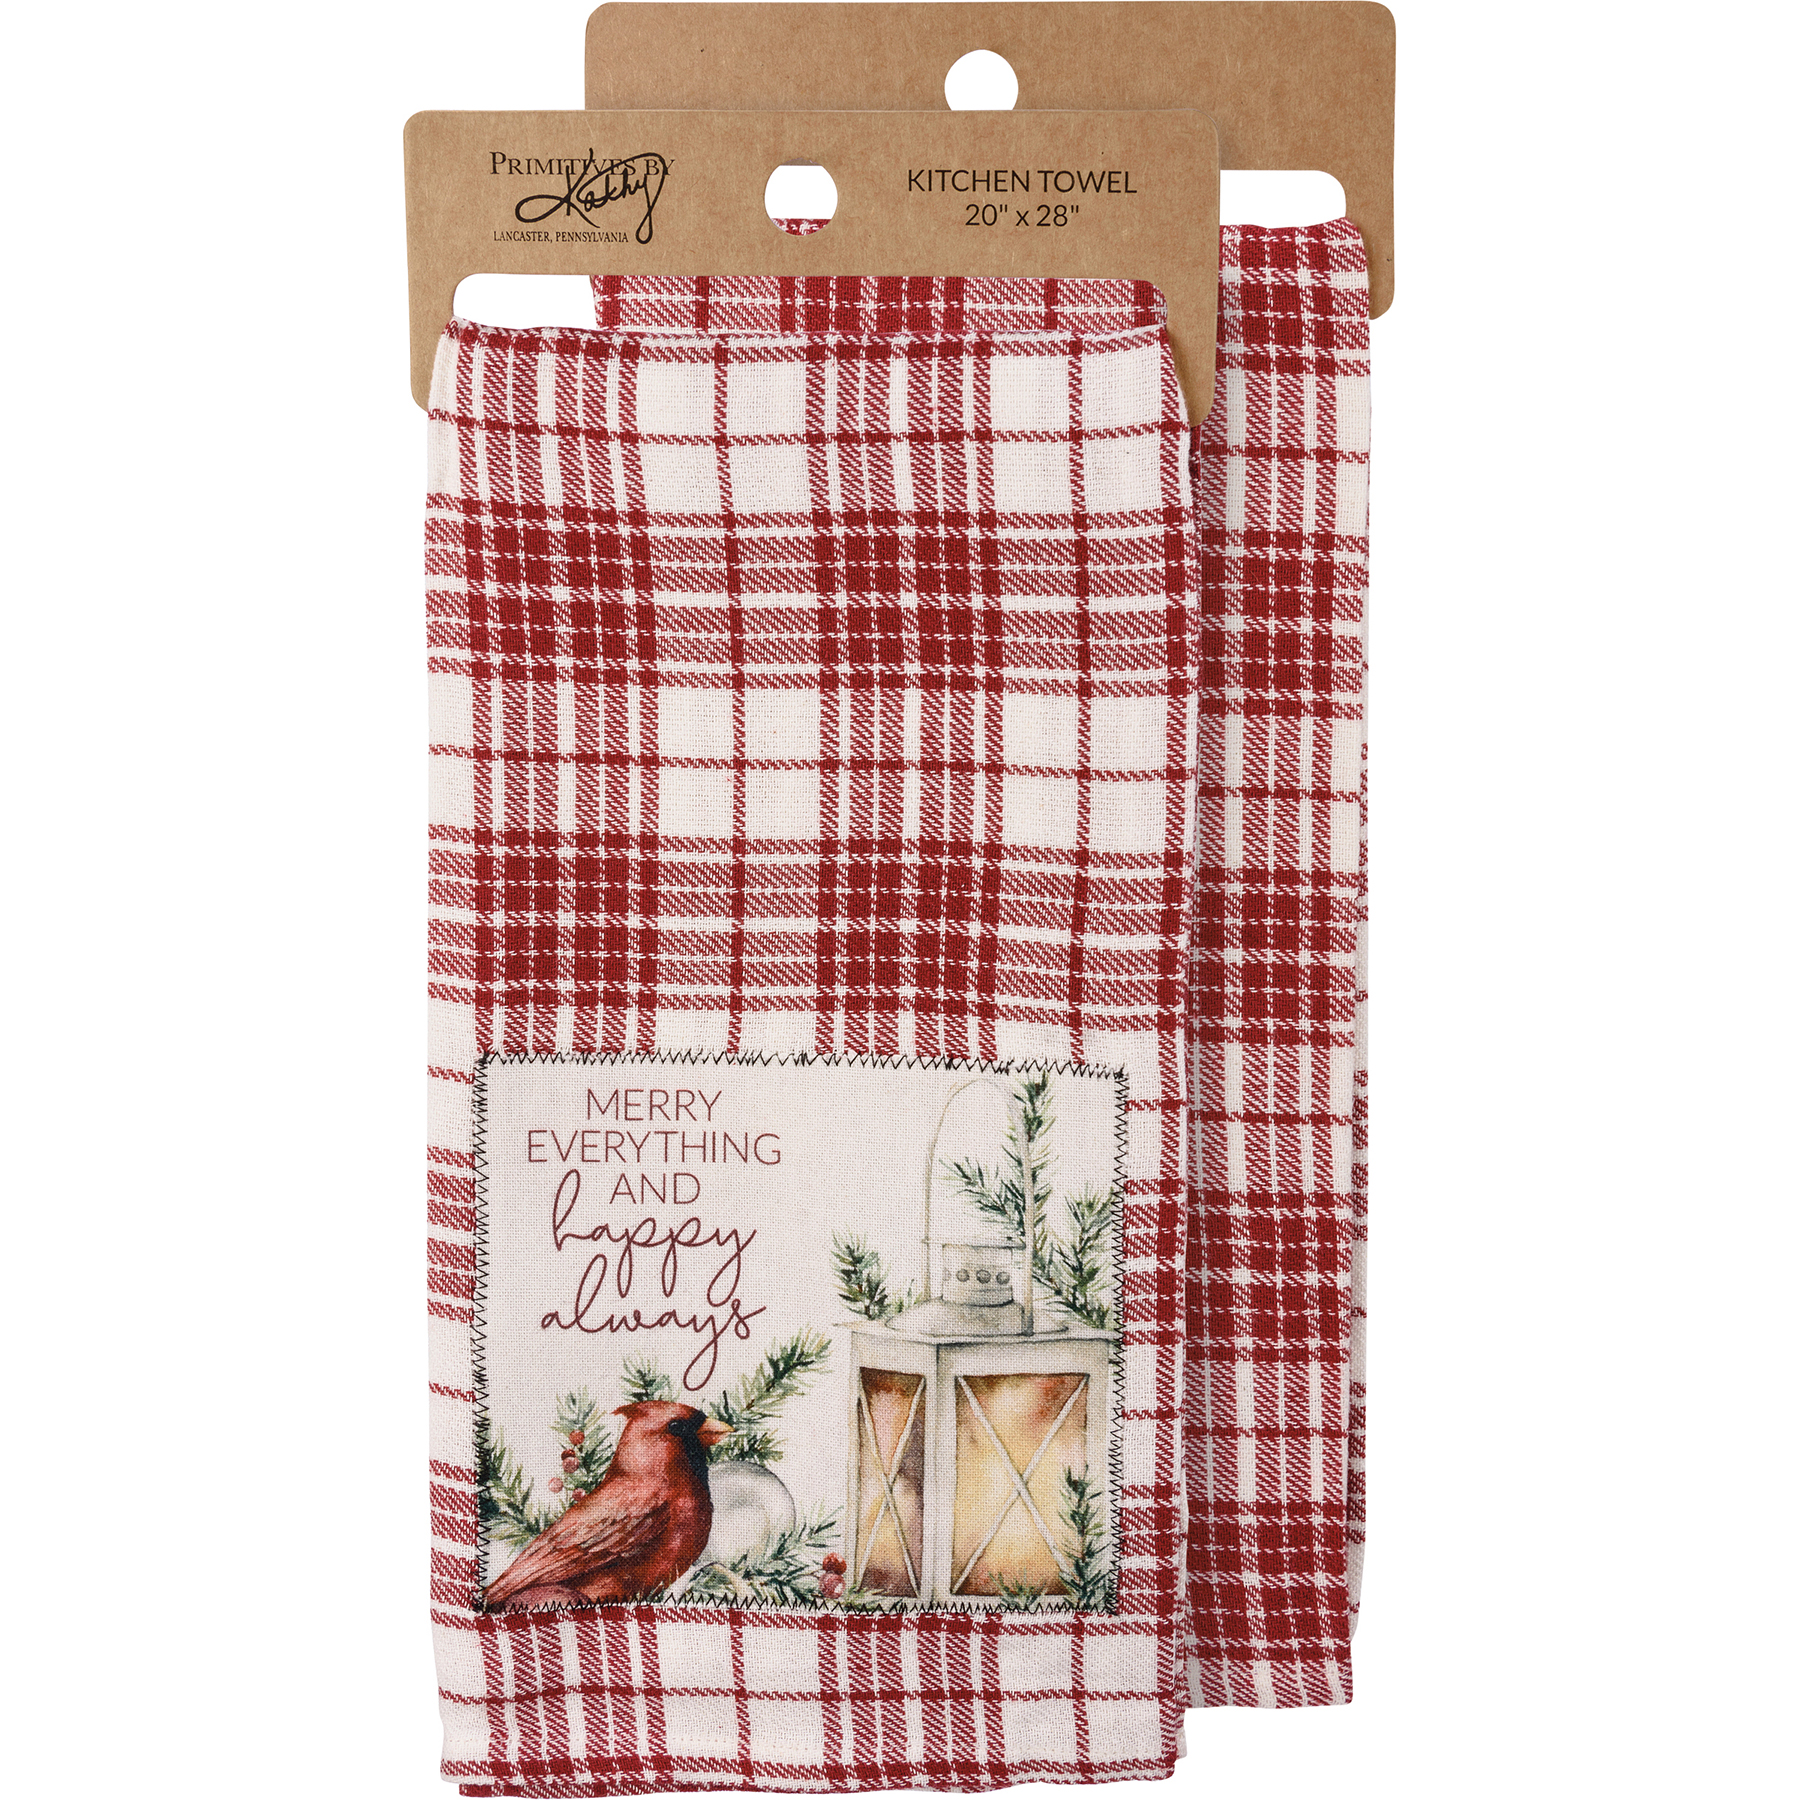 All-Clad Kitchen Towel - Check Fennel – The Happy Cook